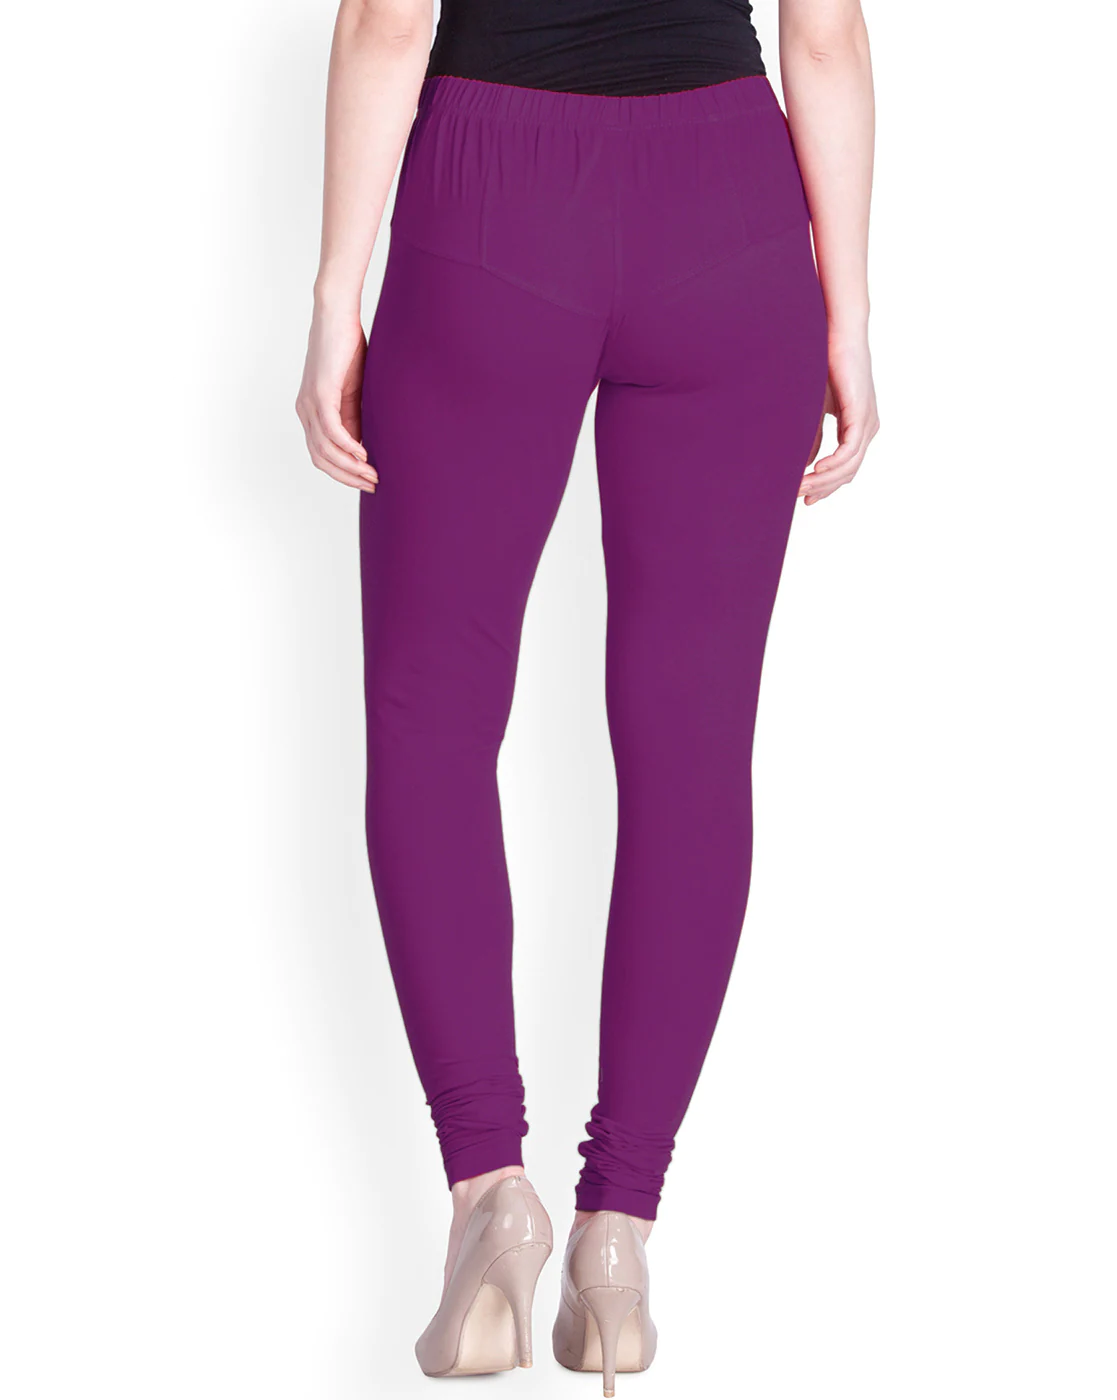 Buy Lyra Leggings online from Shapping At Home